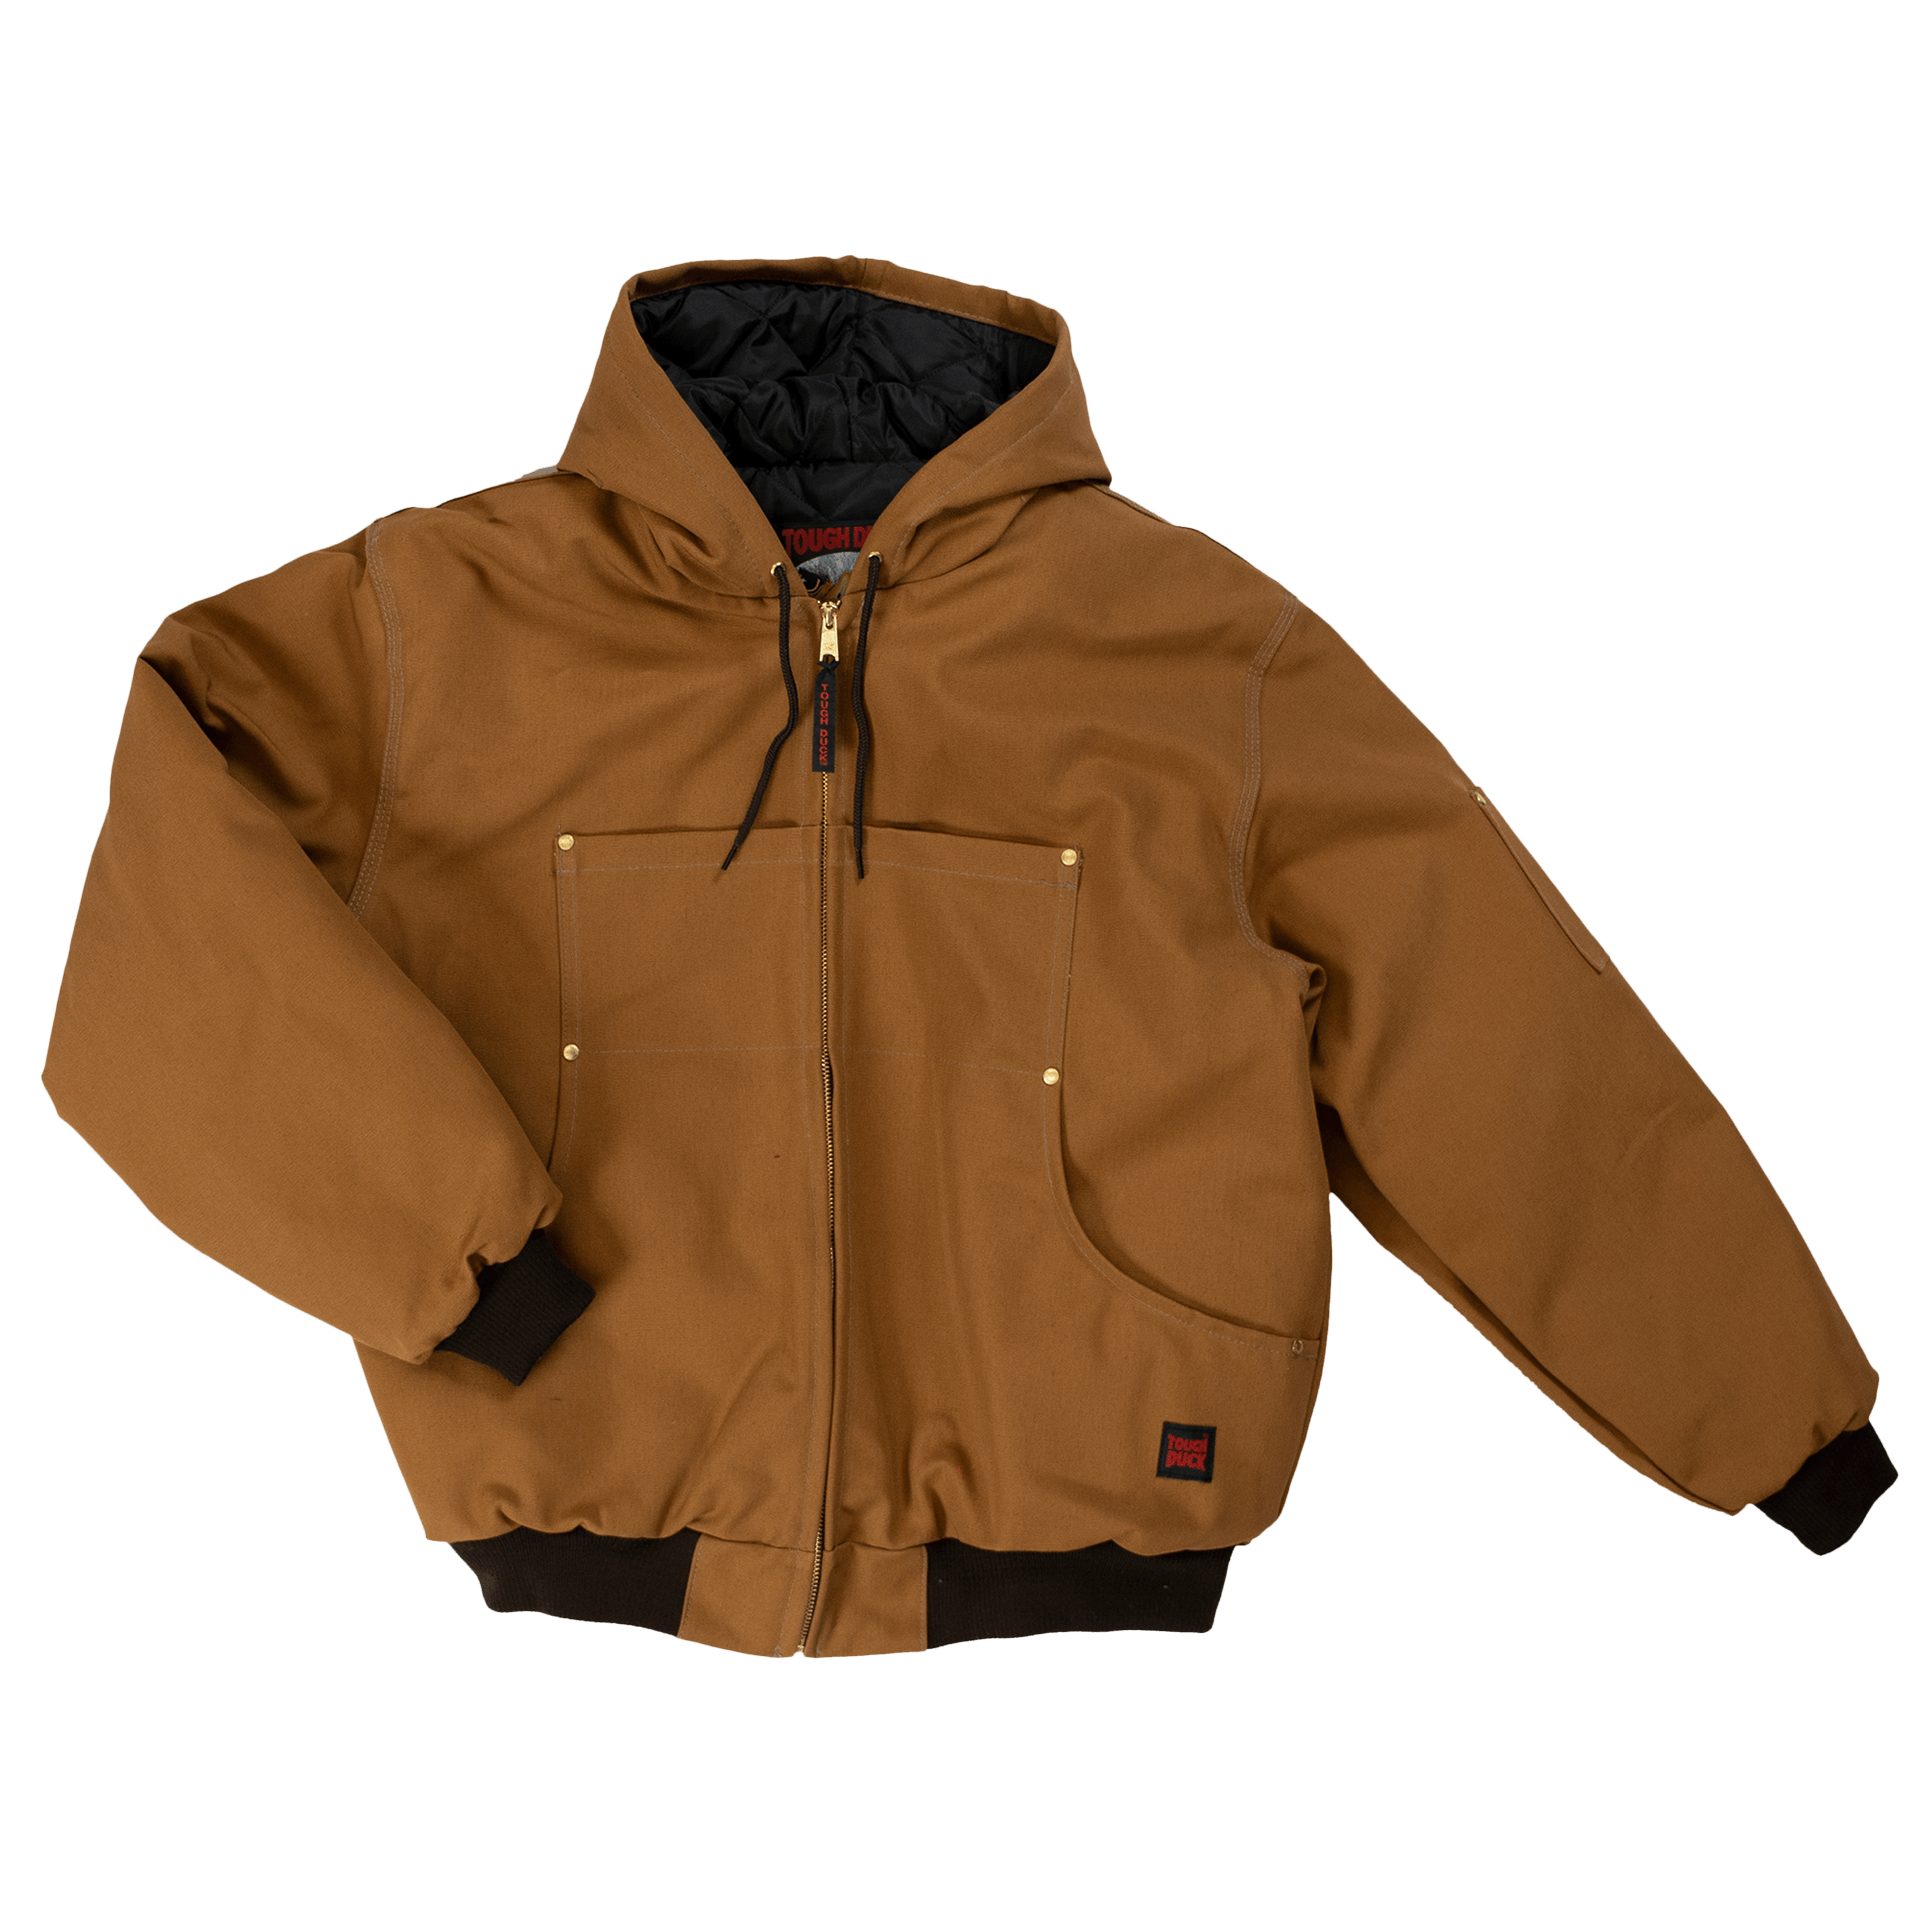 Tough Duck Hooded Bomber Jacket - 5123 - Brown